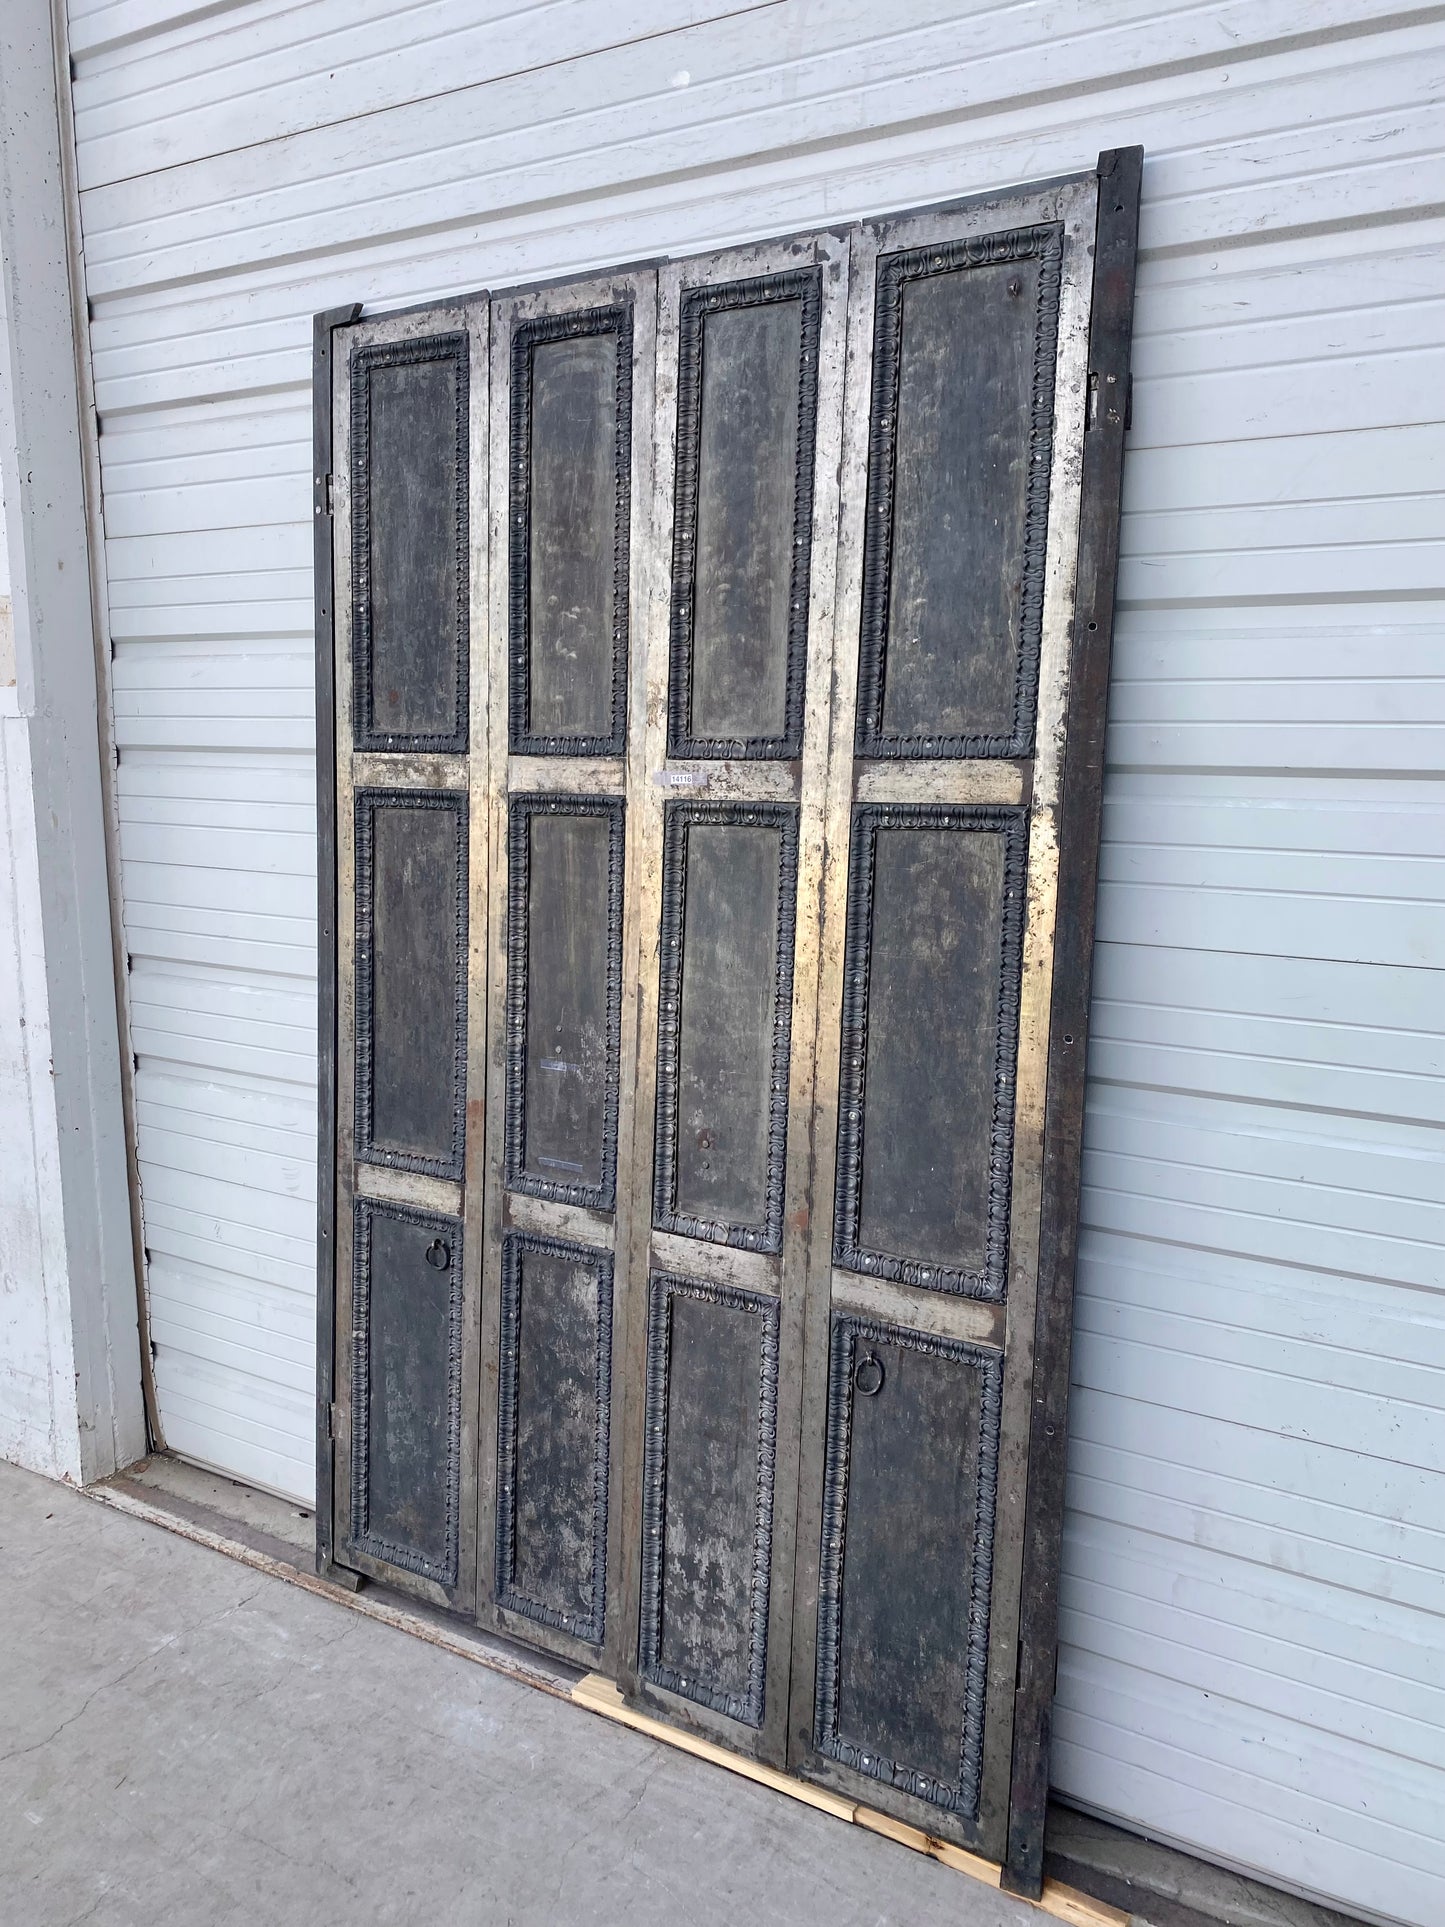 Pair of Steel Bi- fold Shutters with Cast Iron Details (c. 1861 NYC)